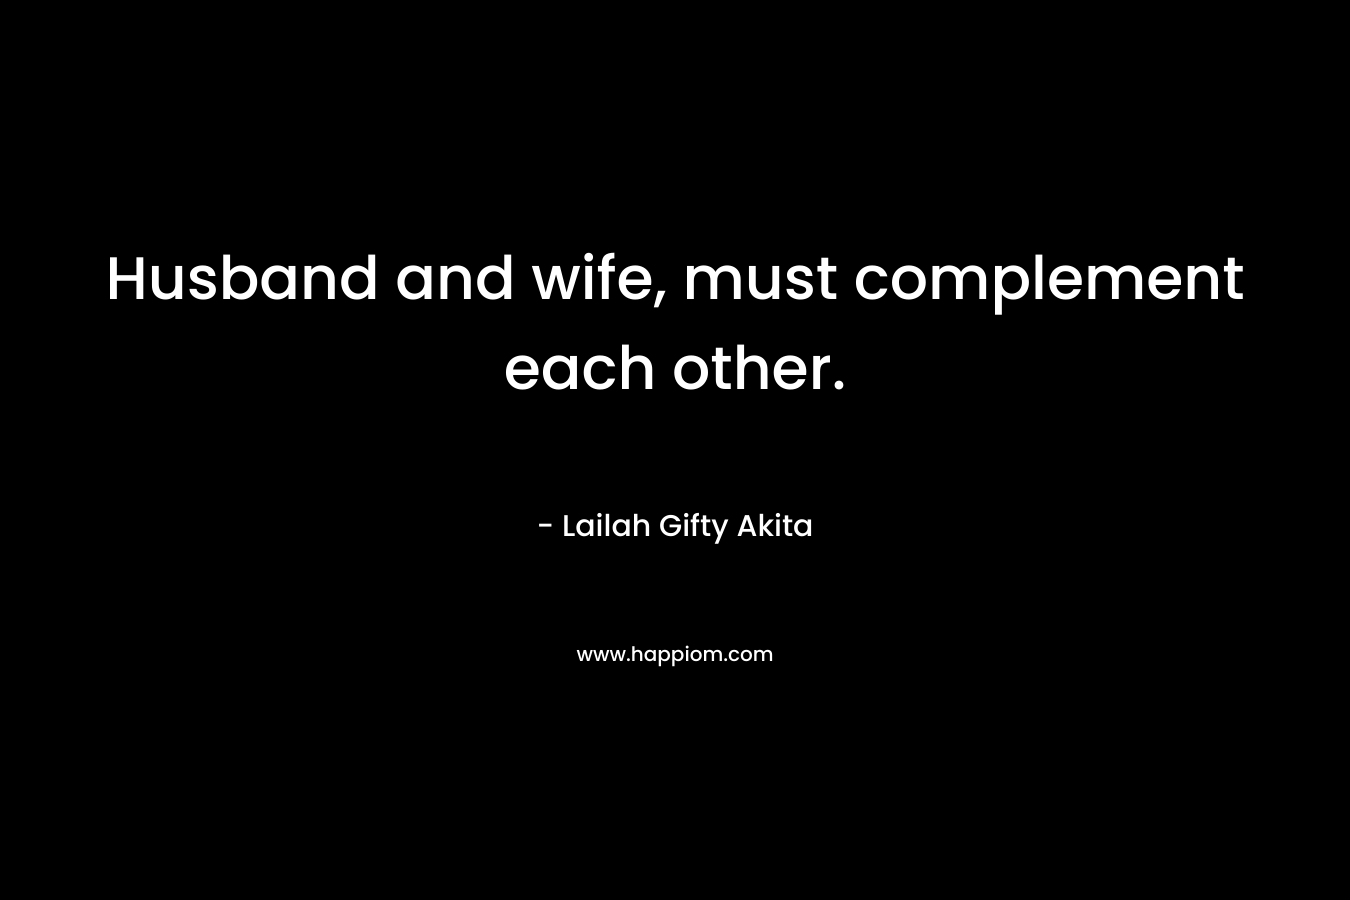 Husband and wife, must complement each other. – Lailah Gifty Akita